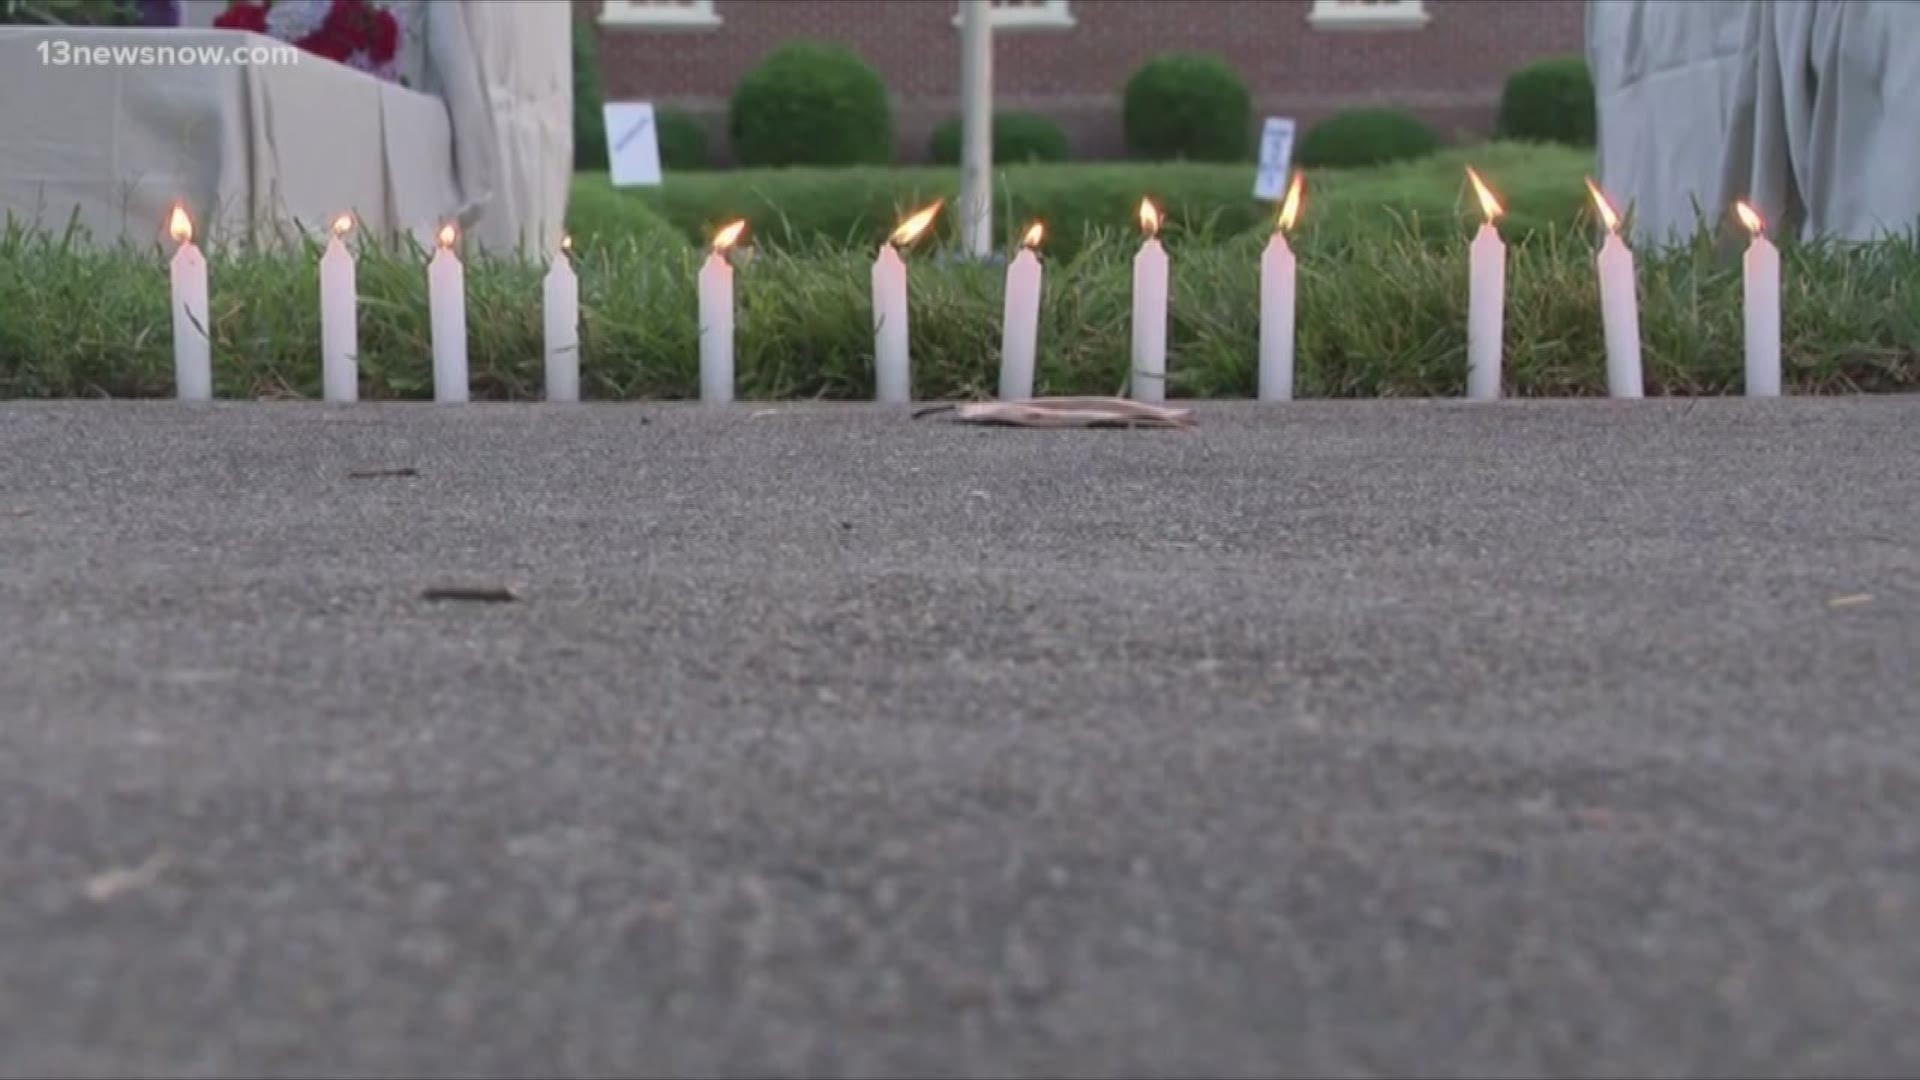 Prayers and messages continue to grow at the Virginia Beach Police Headquarters in the Municipal Center.